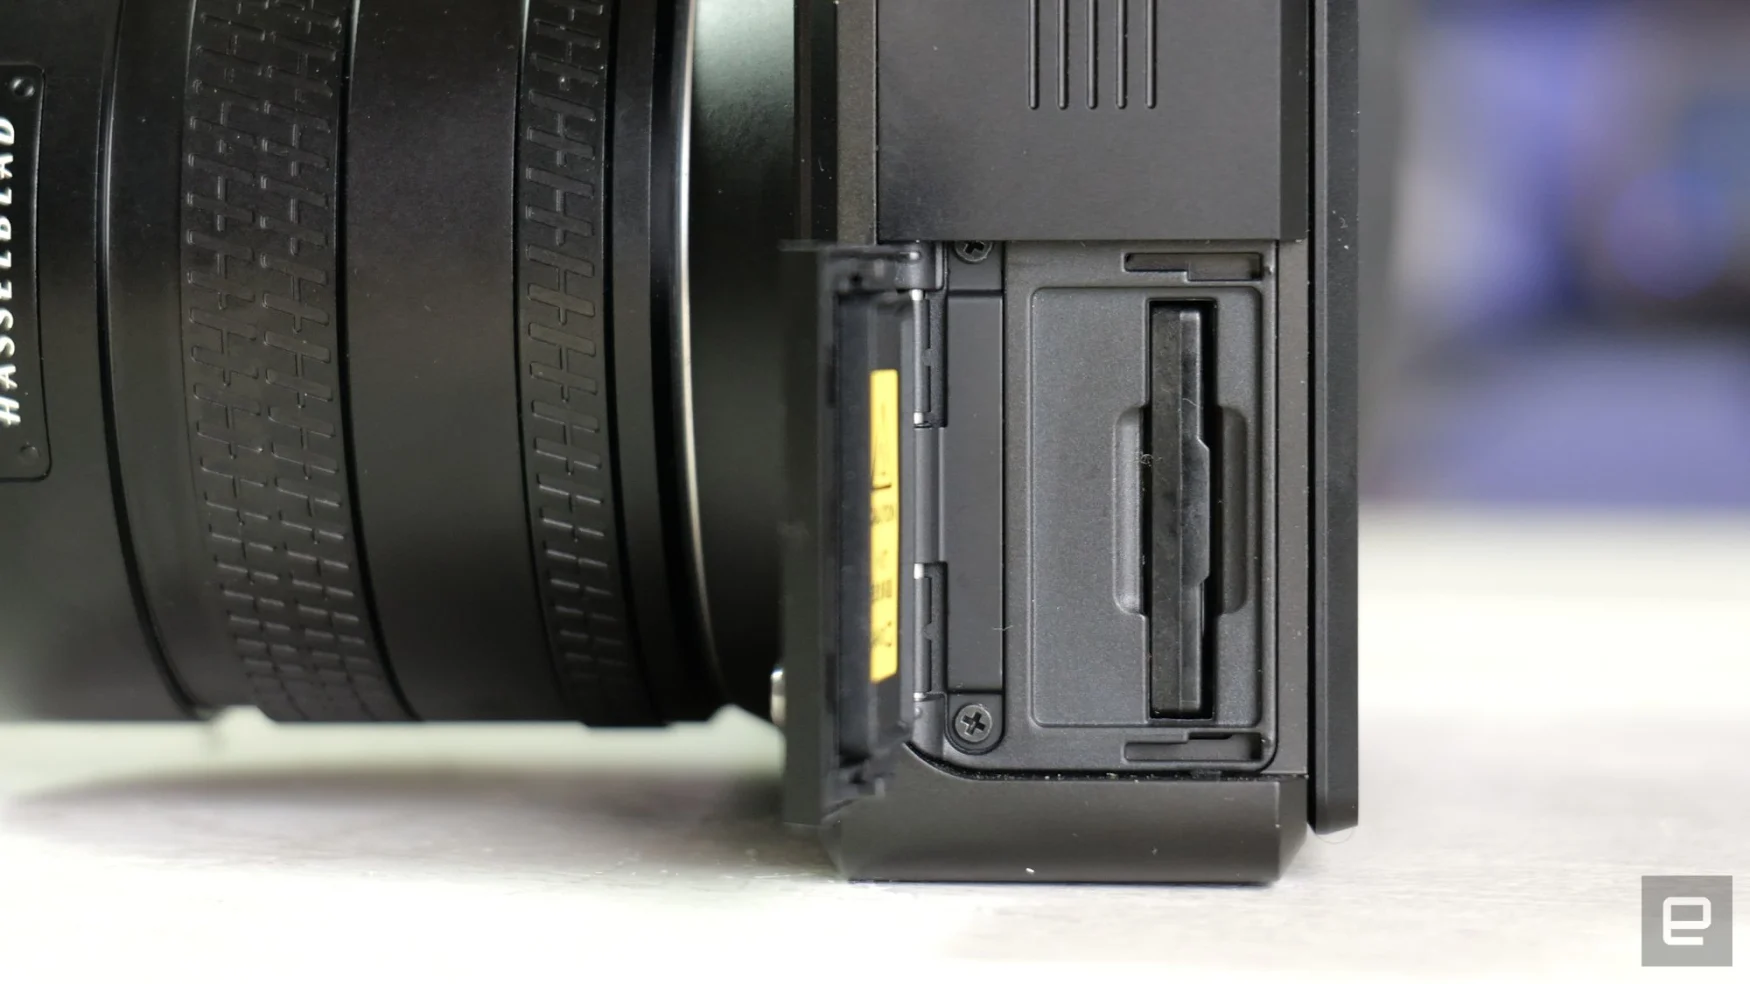 Hasselblad X2D 100C: incredible resolution, beautiful flaws